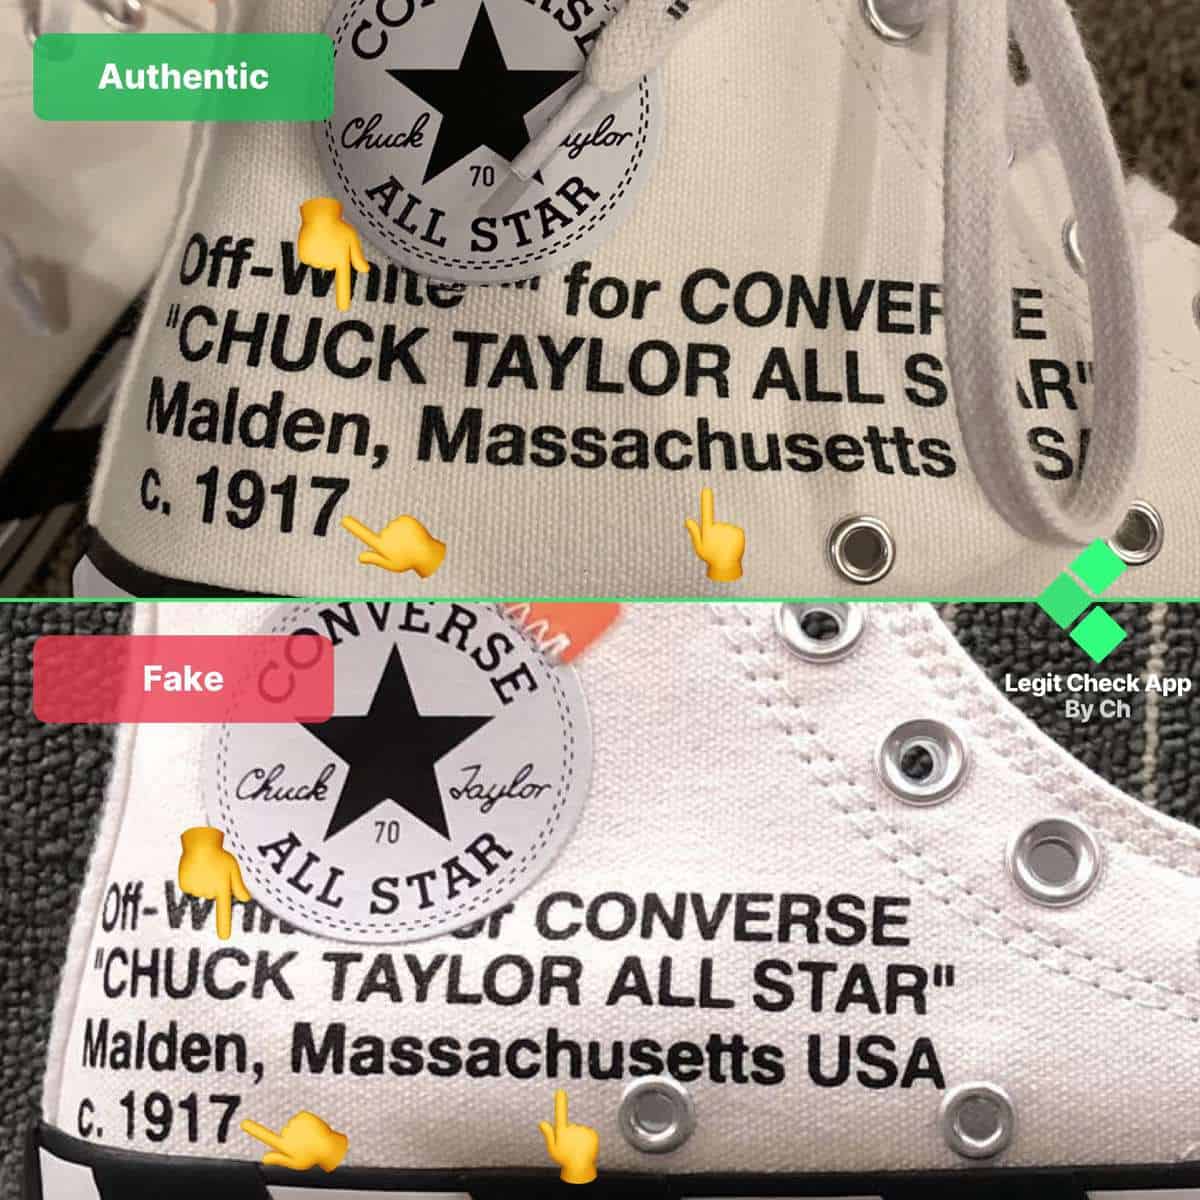 Off White Converse 2 0 Fake Vs Real Guide How To Spot Fake Ow Converse 163826c Legit Check By Ch - roblox off white converse